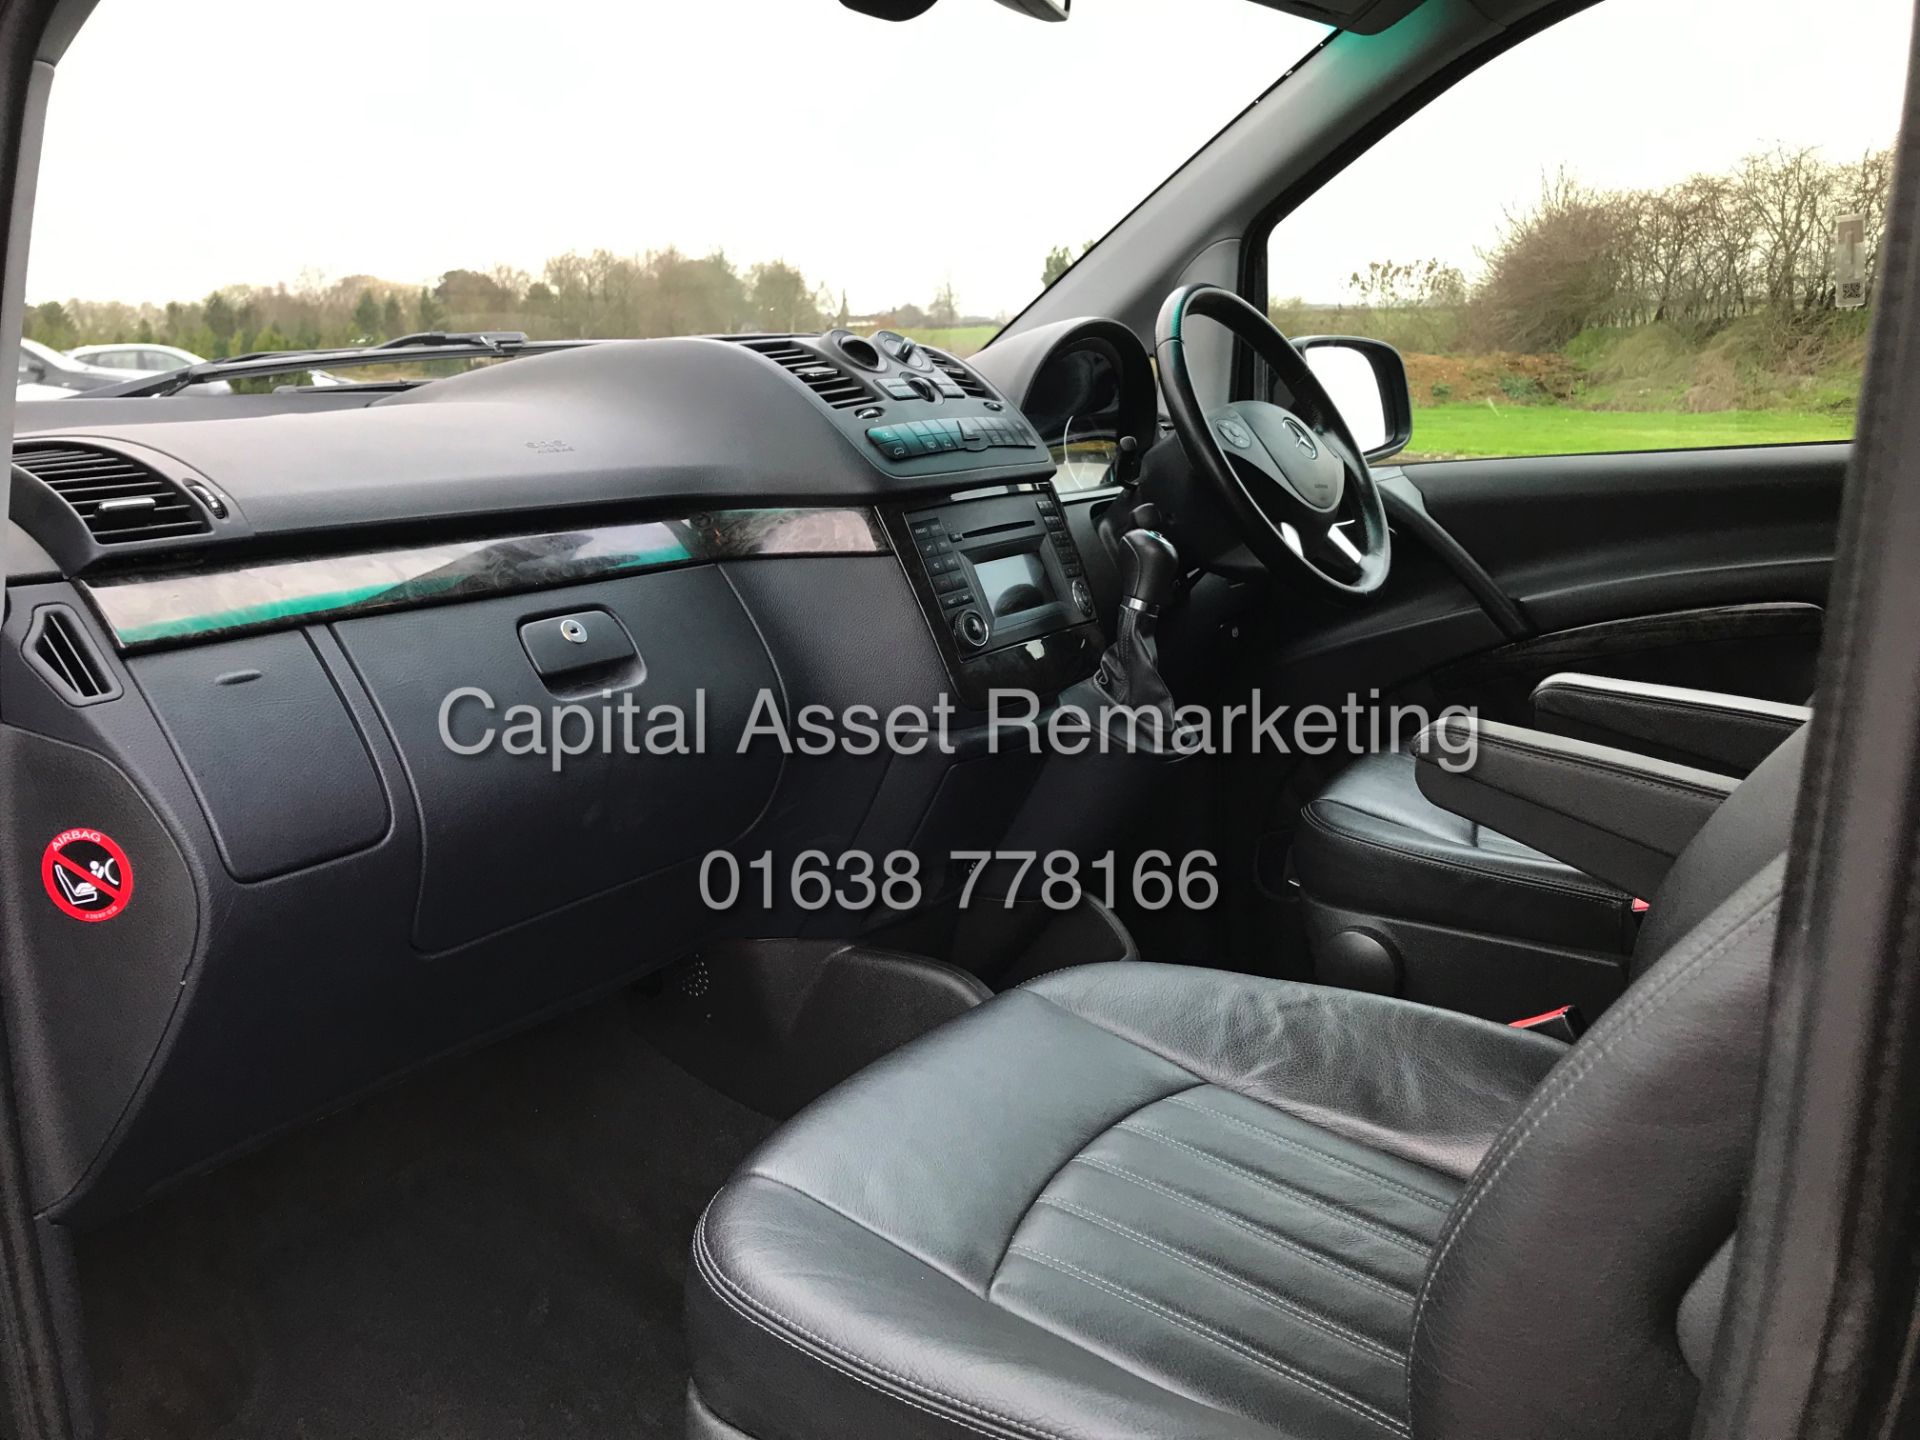 (ON SALE) MERCEDES VIANO 2.2CDI "AMBIENET" XLWB 8 SEATER (14 REG) 1 OWNER - FULLY LOADED - LEATHER - Image 14 of 28